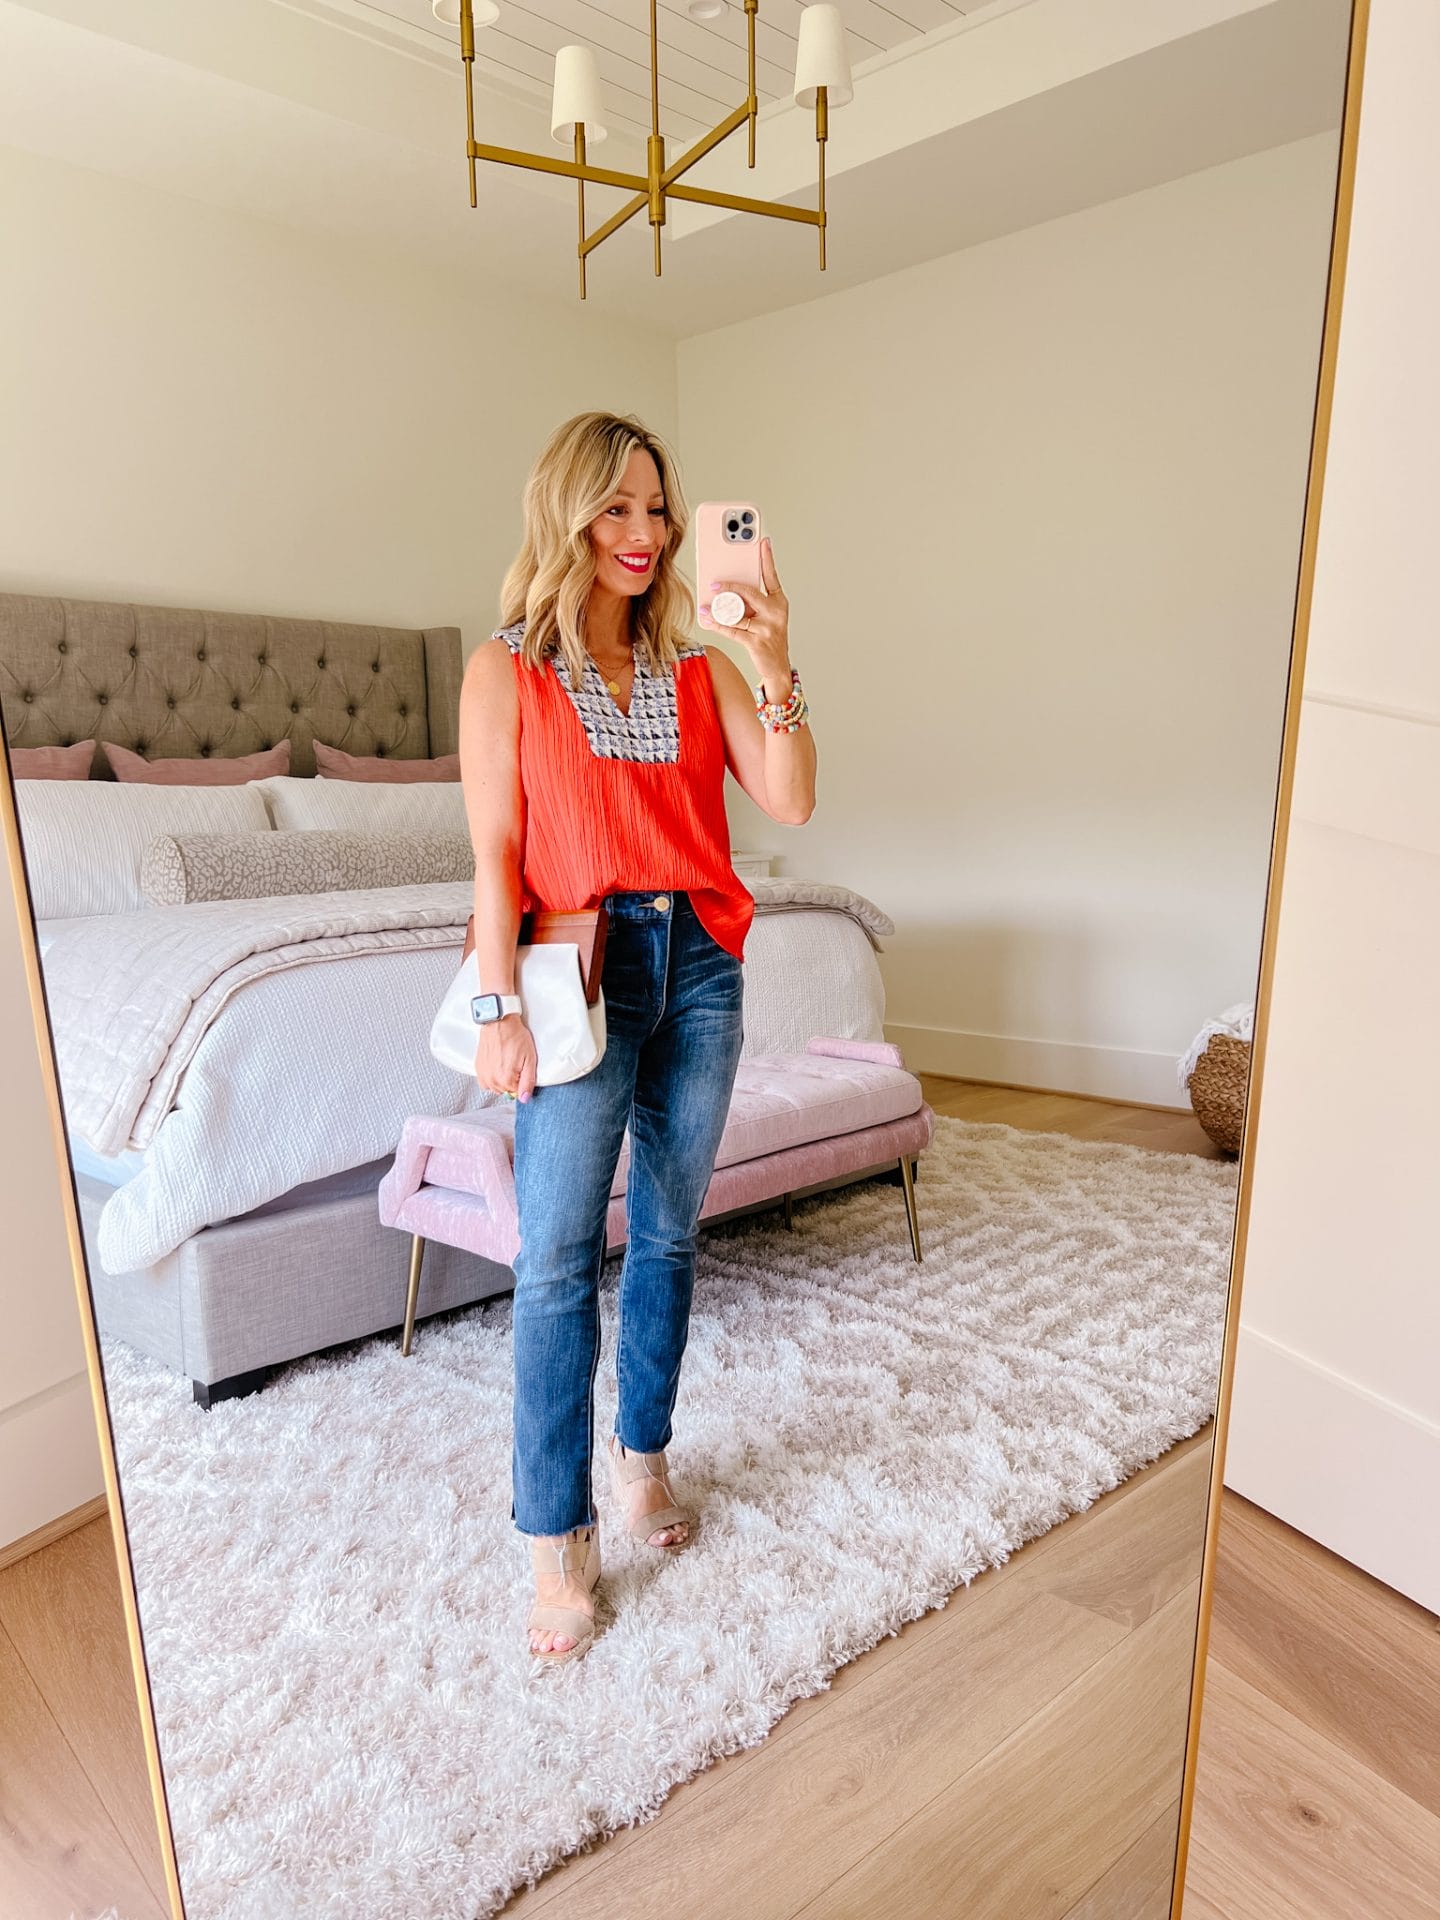 Red Top with Embroidery, Jeans, Sandals Clutch 